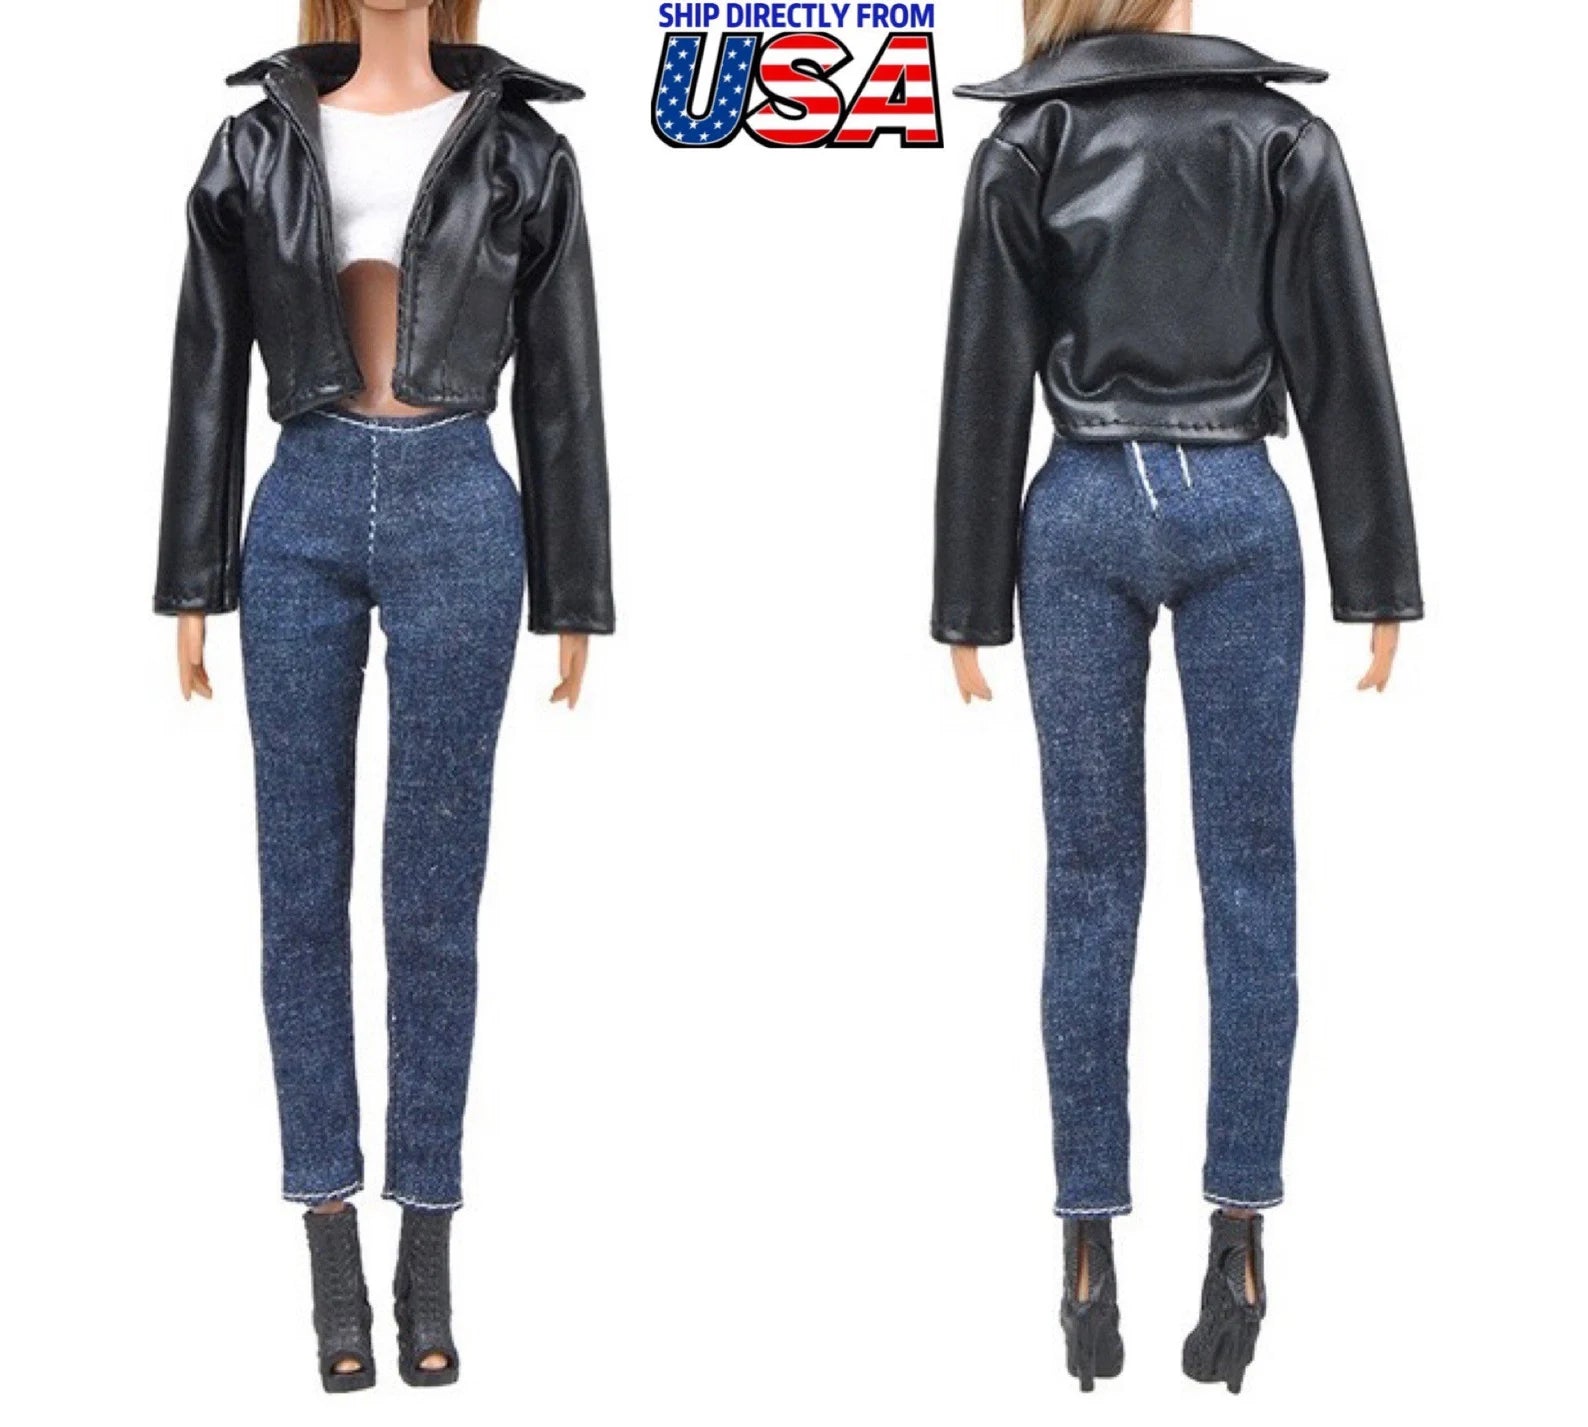 3pcs Handmade Leather Jacket+White Tee+Jeans For 11.5inch Fashion Doll Princess Top Doll Clothes 1/6 Toy